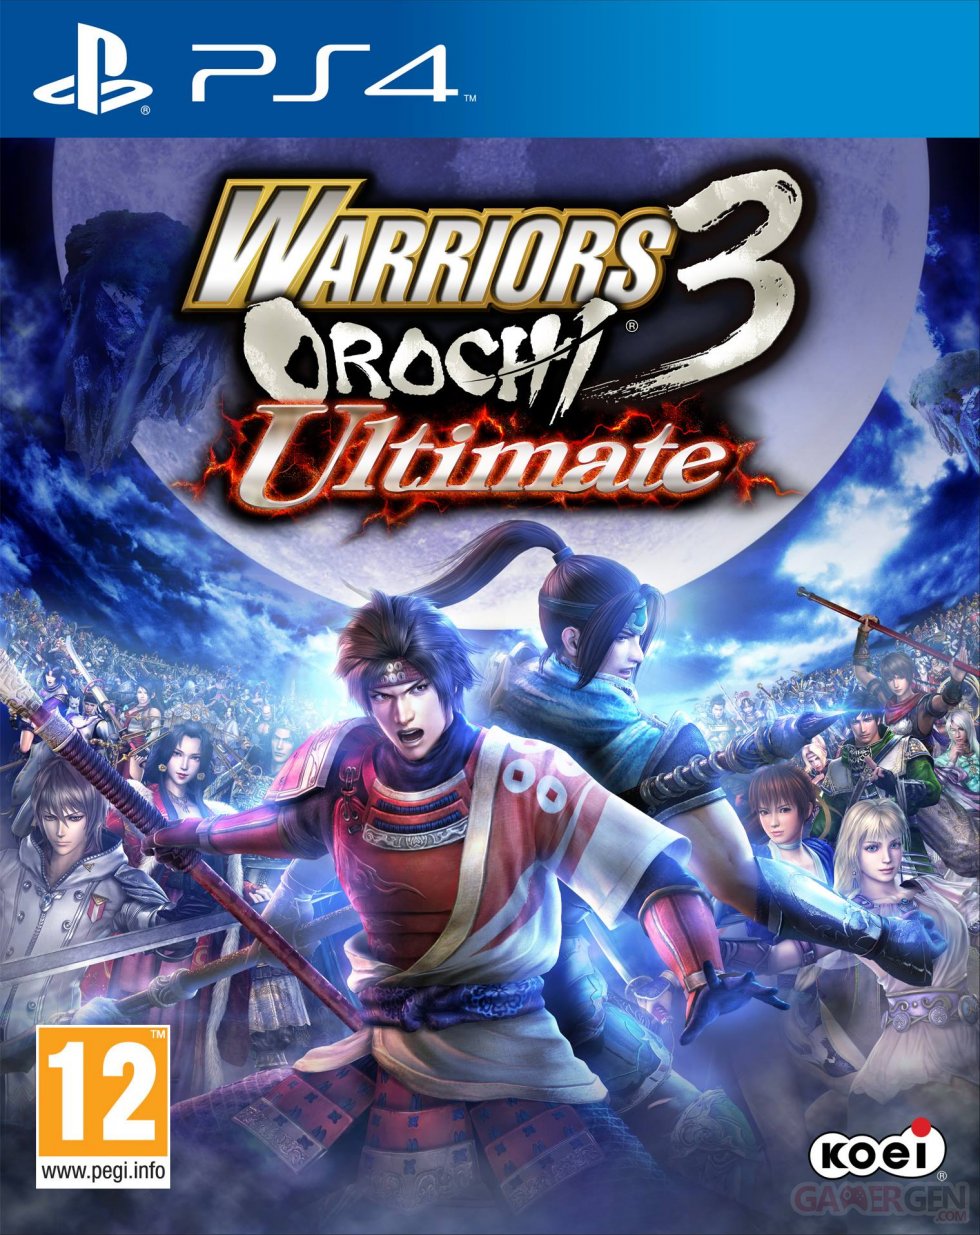 Warriors Orochi 3 Ultimate jaquettes couvertures europe 29.05.2014  (2)